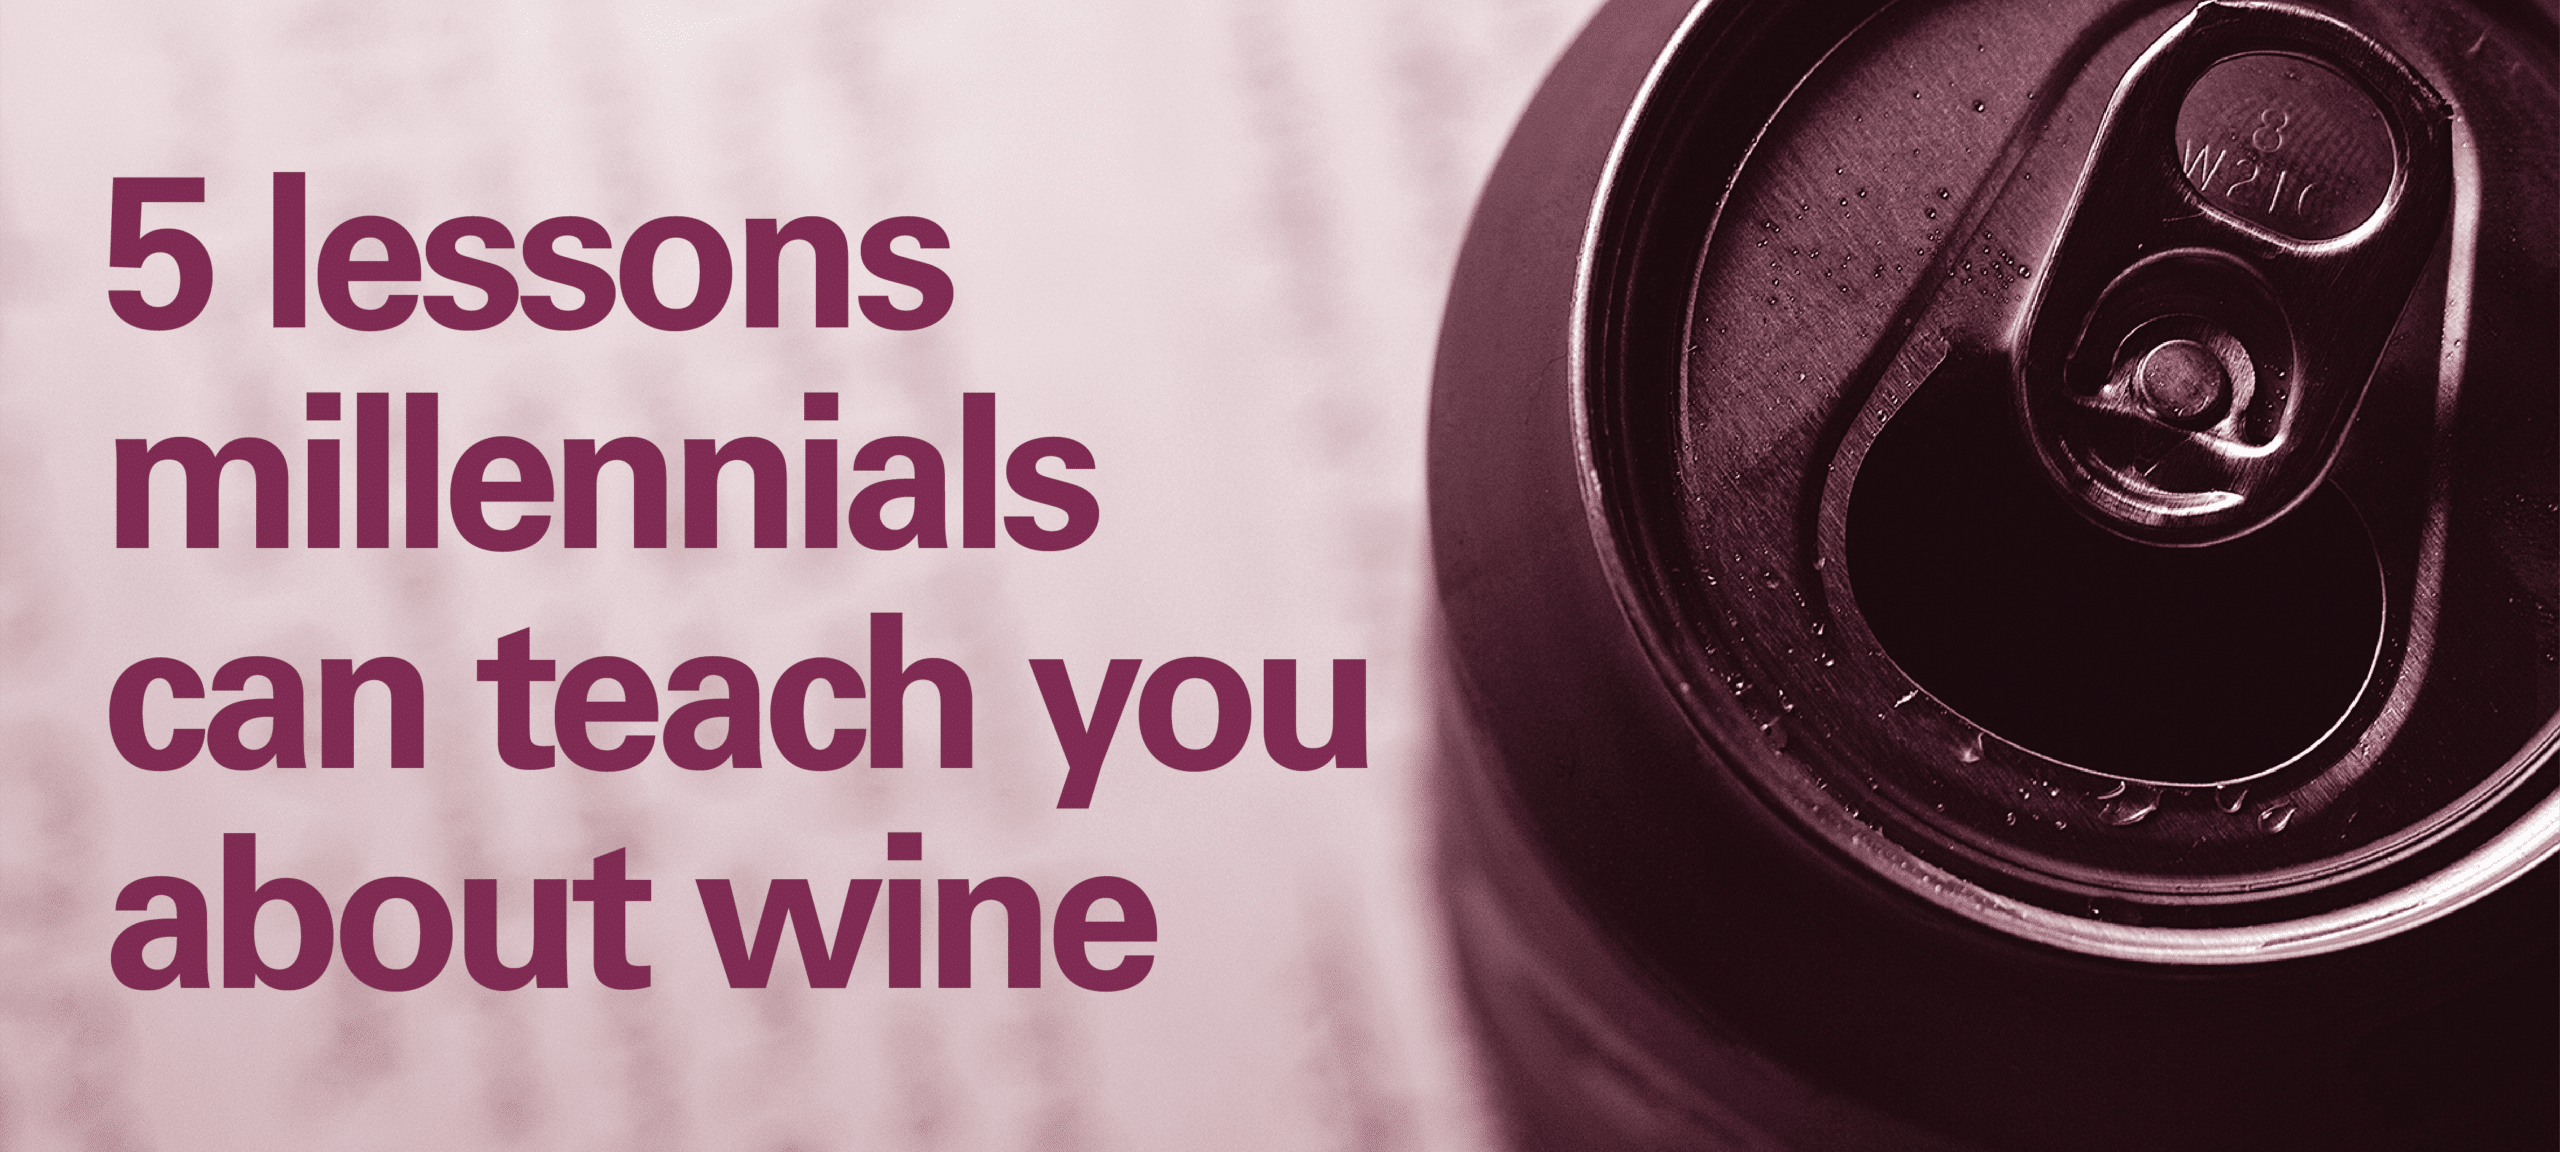 5 lessons millennials can teach you about wine